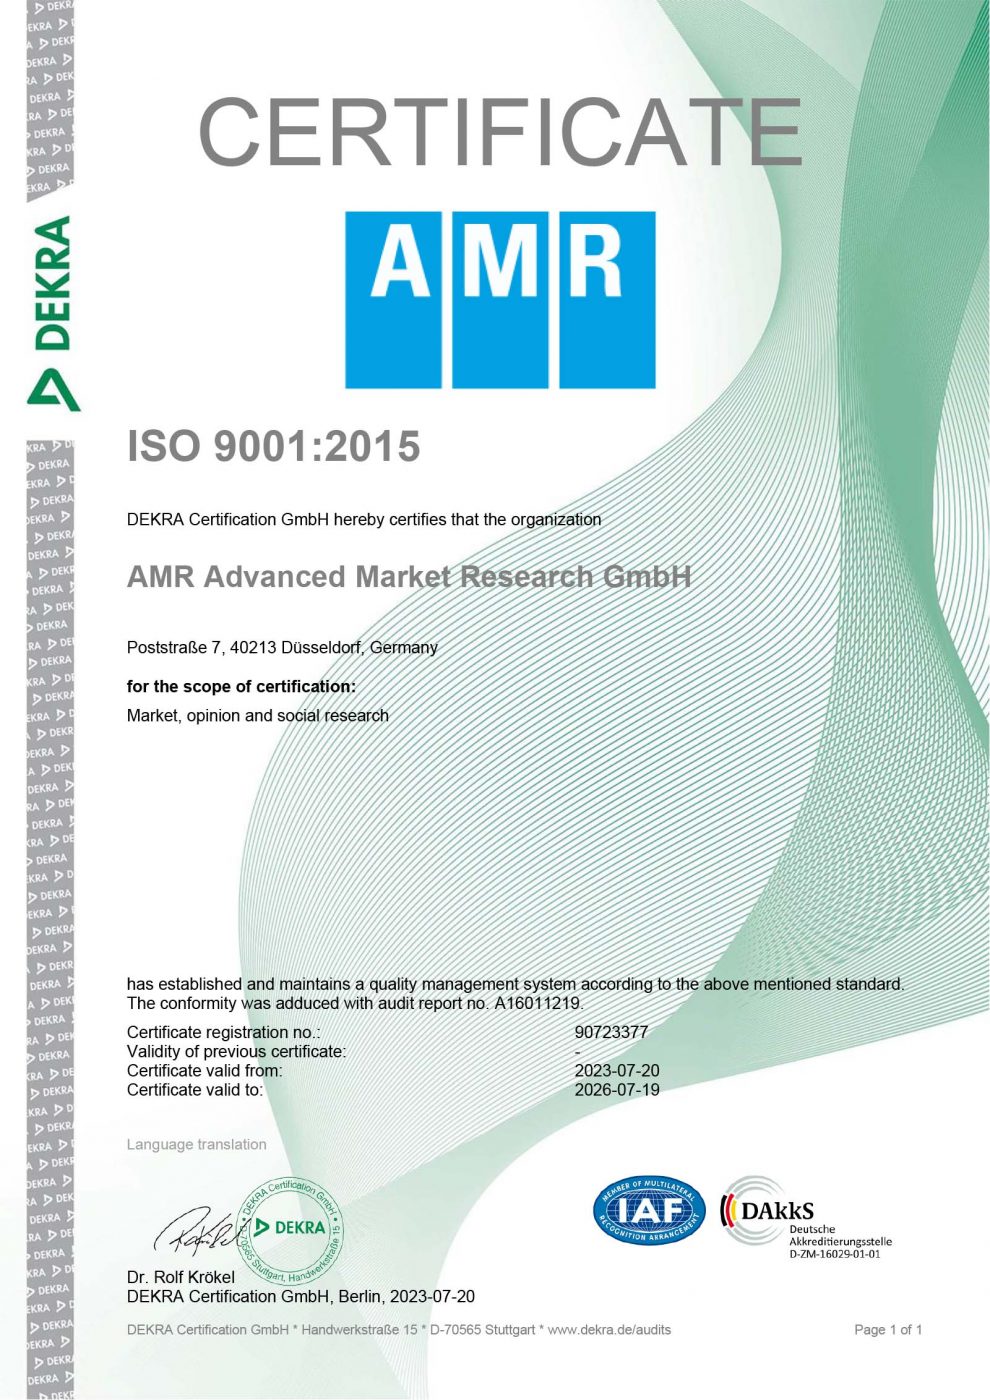 AMR's ISO 9001:2015 Certificate